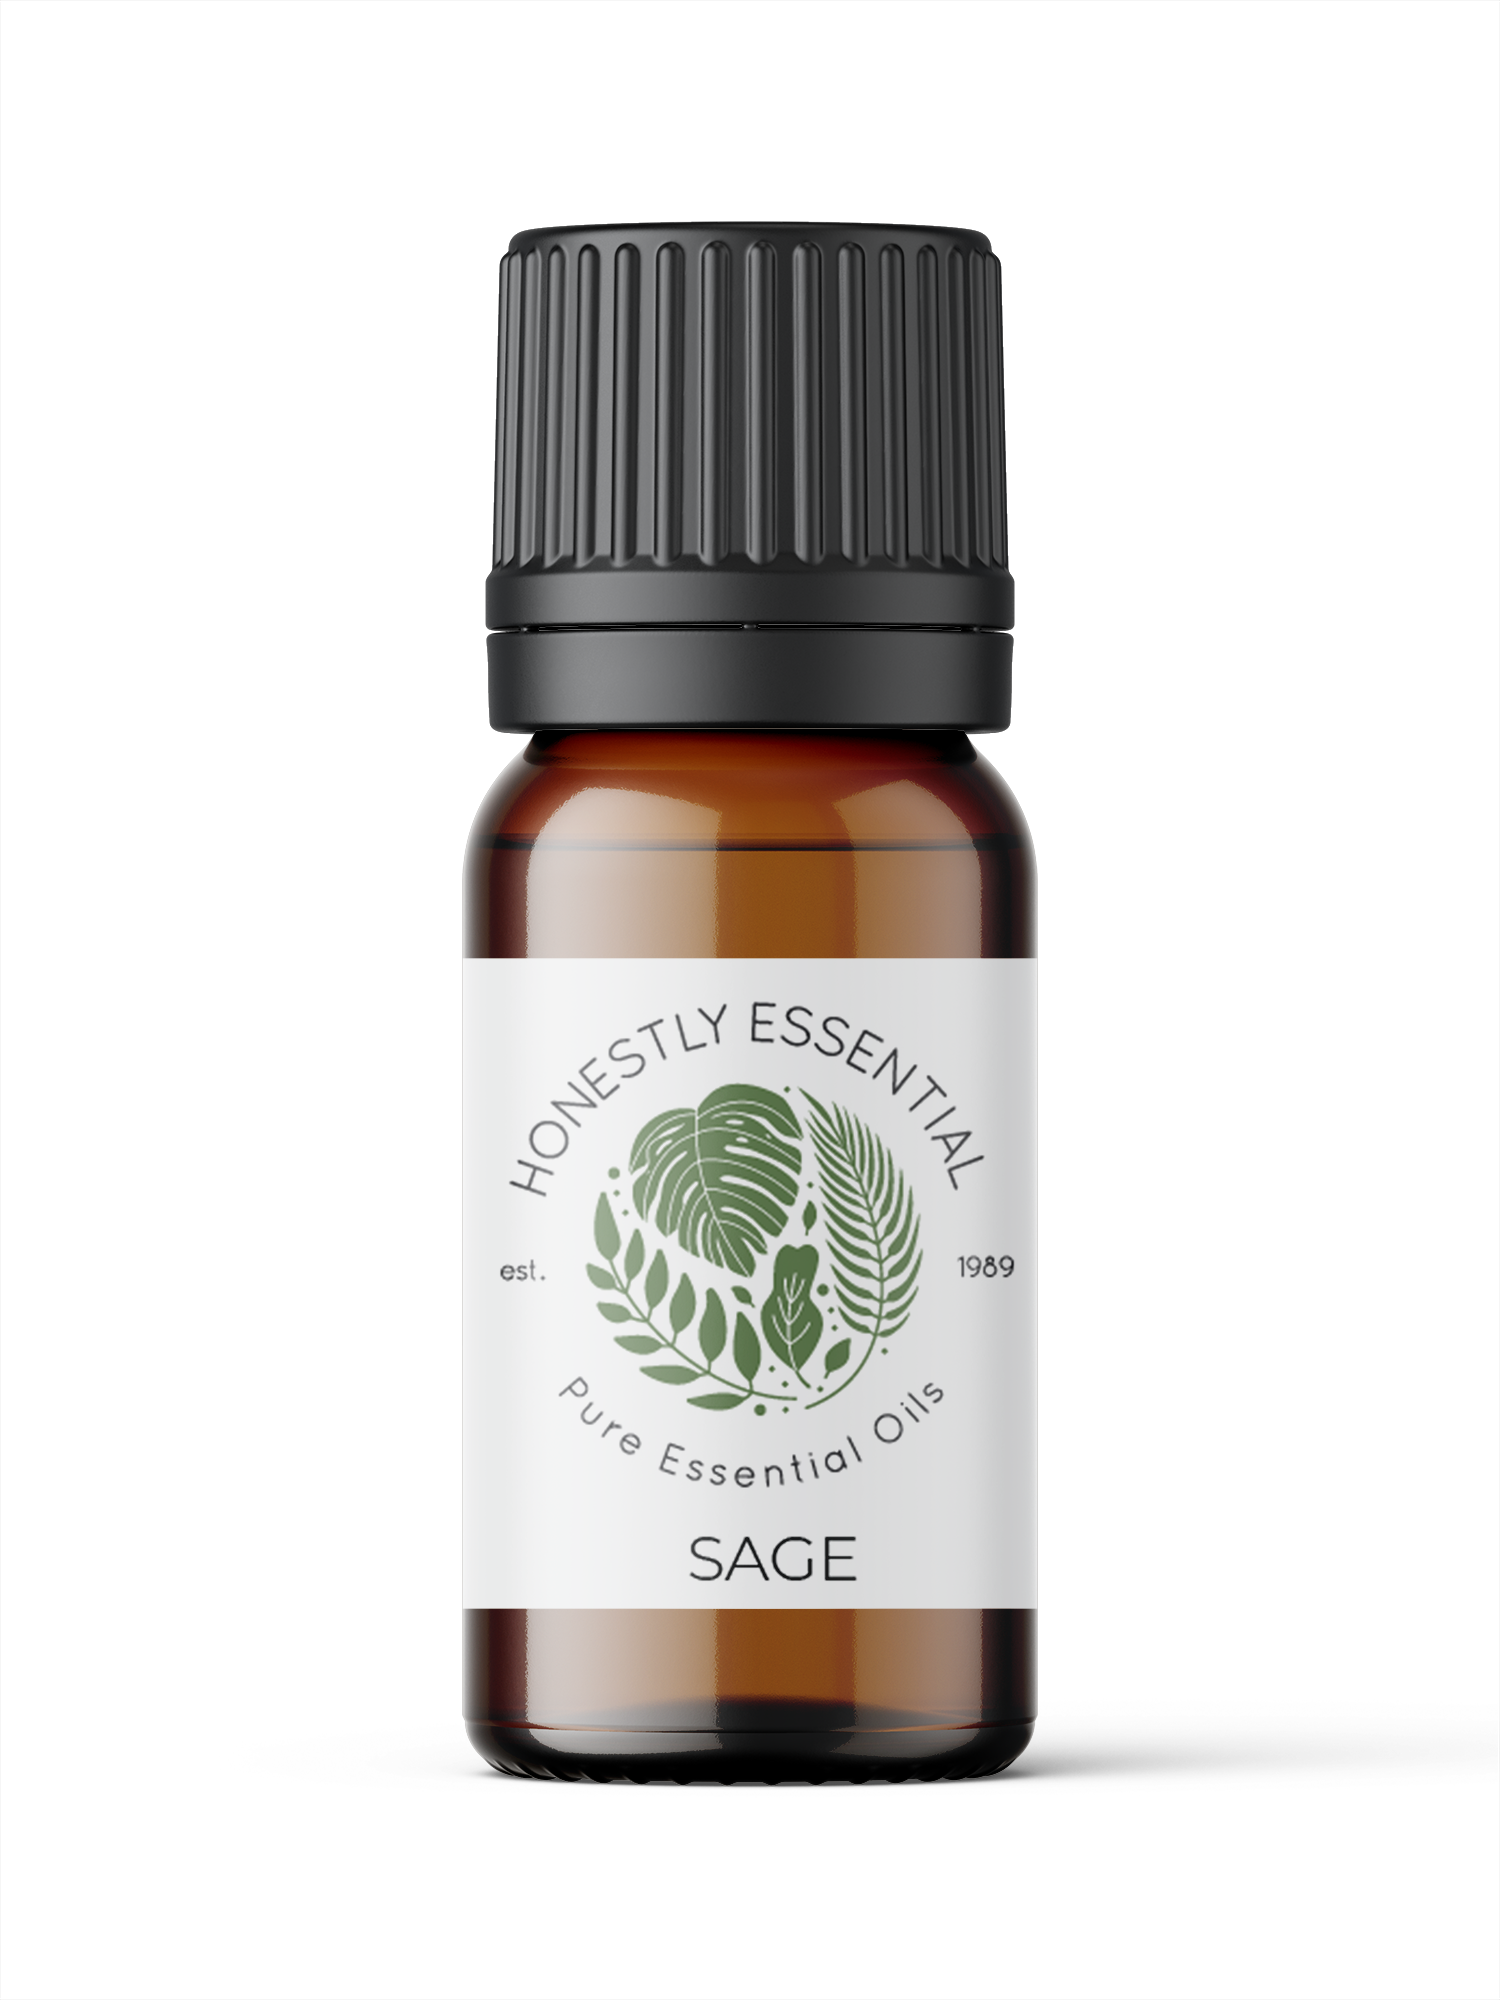 Sage Essential Oil - Essential Oils | Honestly Essential Oils energy, essential, herb, herb essential oil, herbs, Immunity, insect and pest repellent, oil, organic, sage